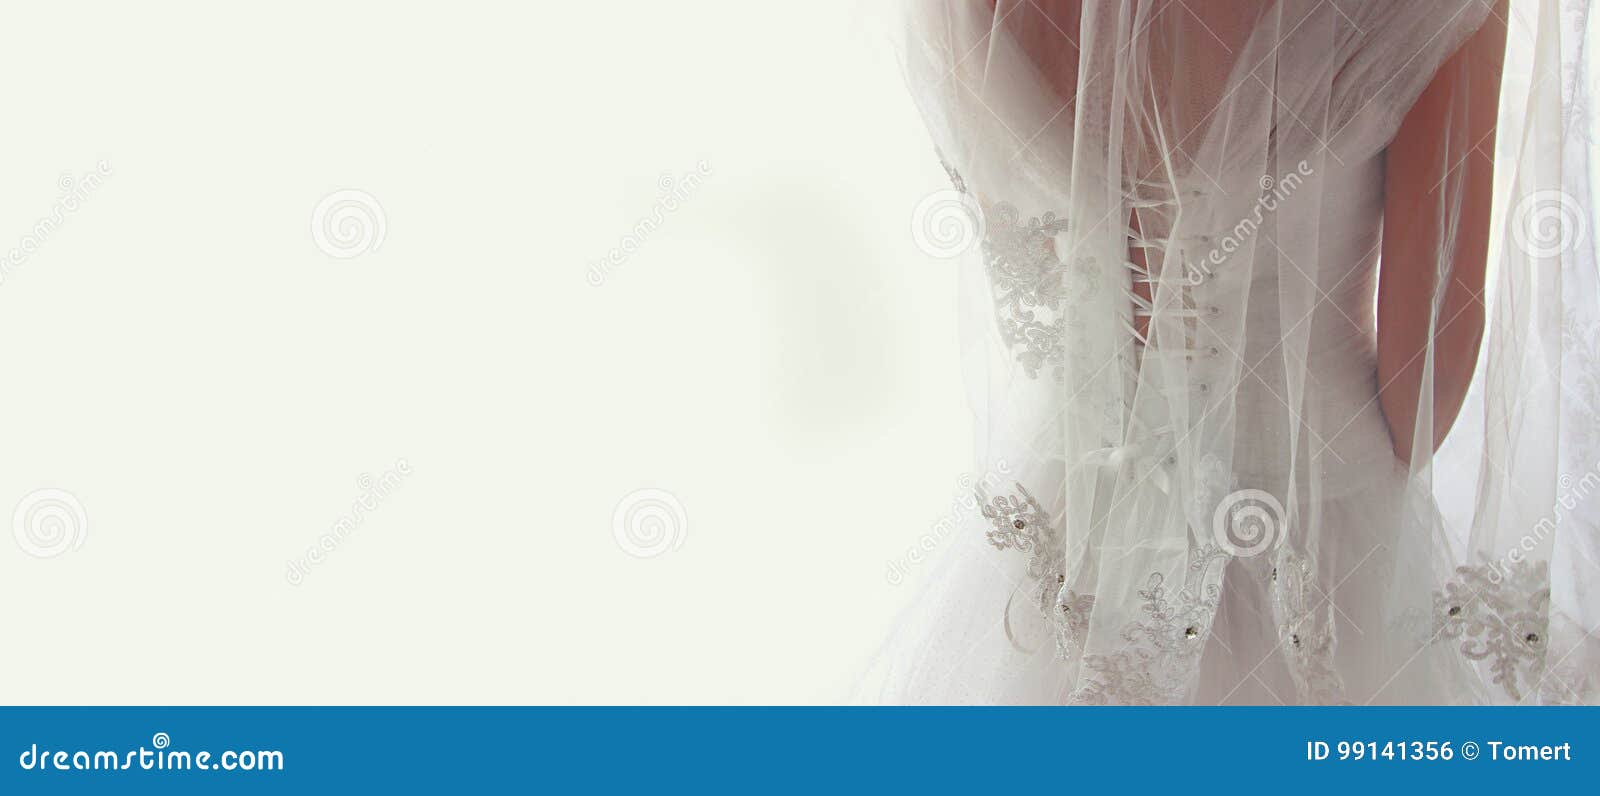 beautiful bride with wedding dress and veil, from behind.